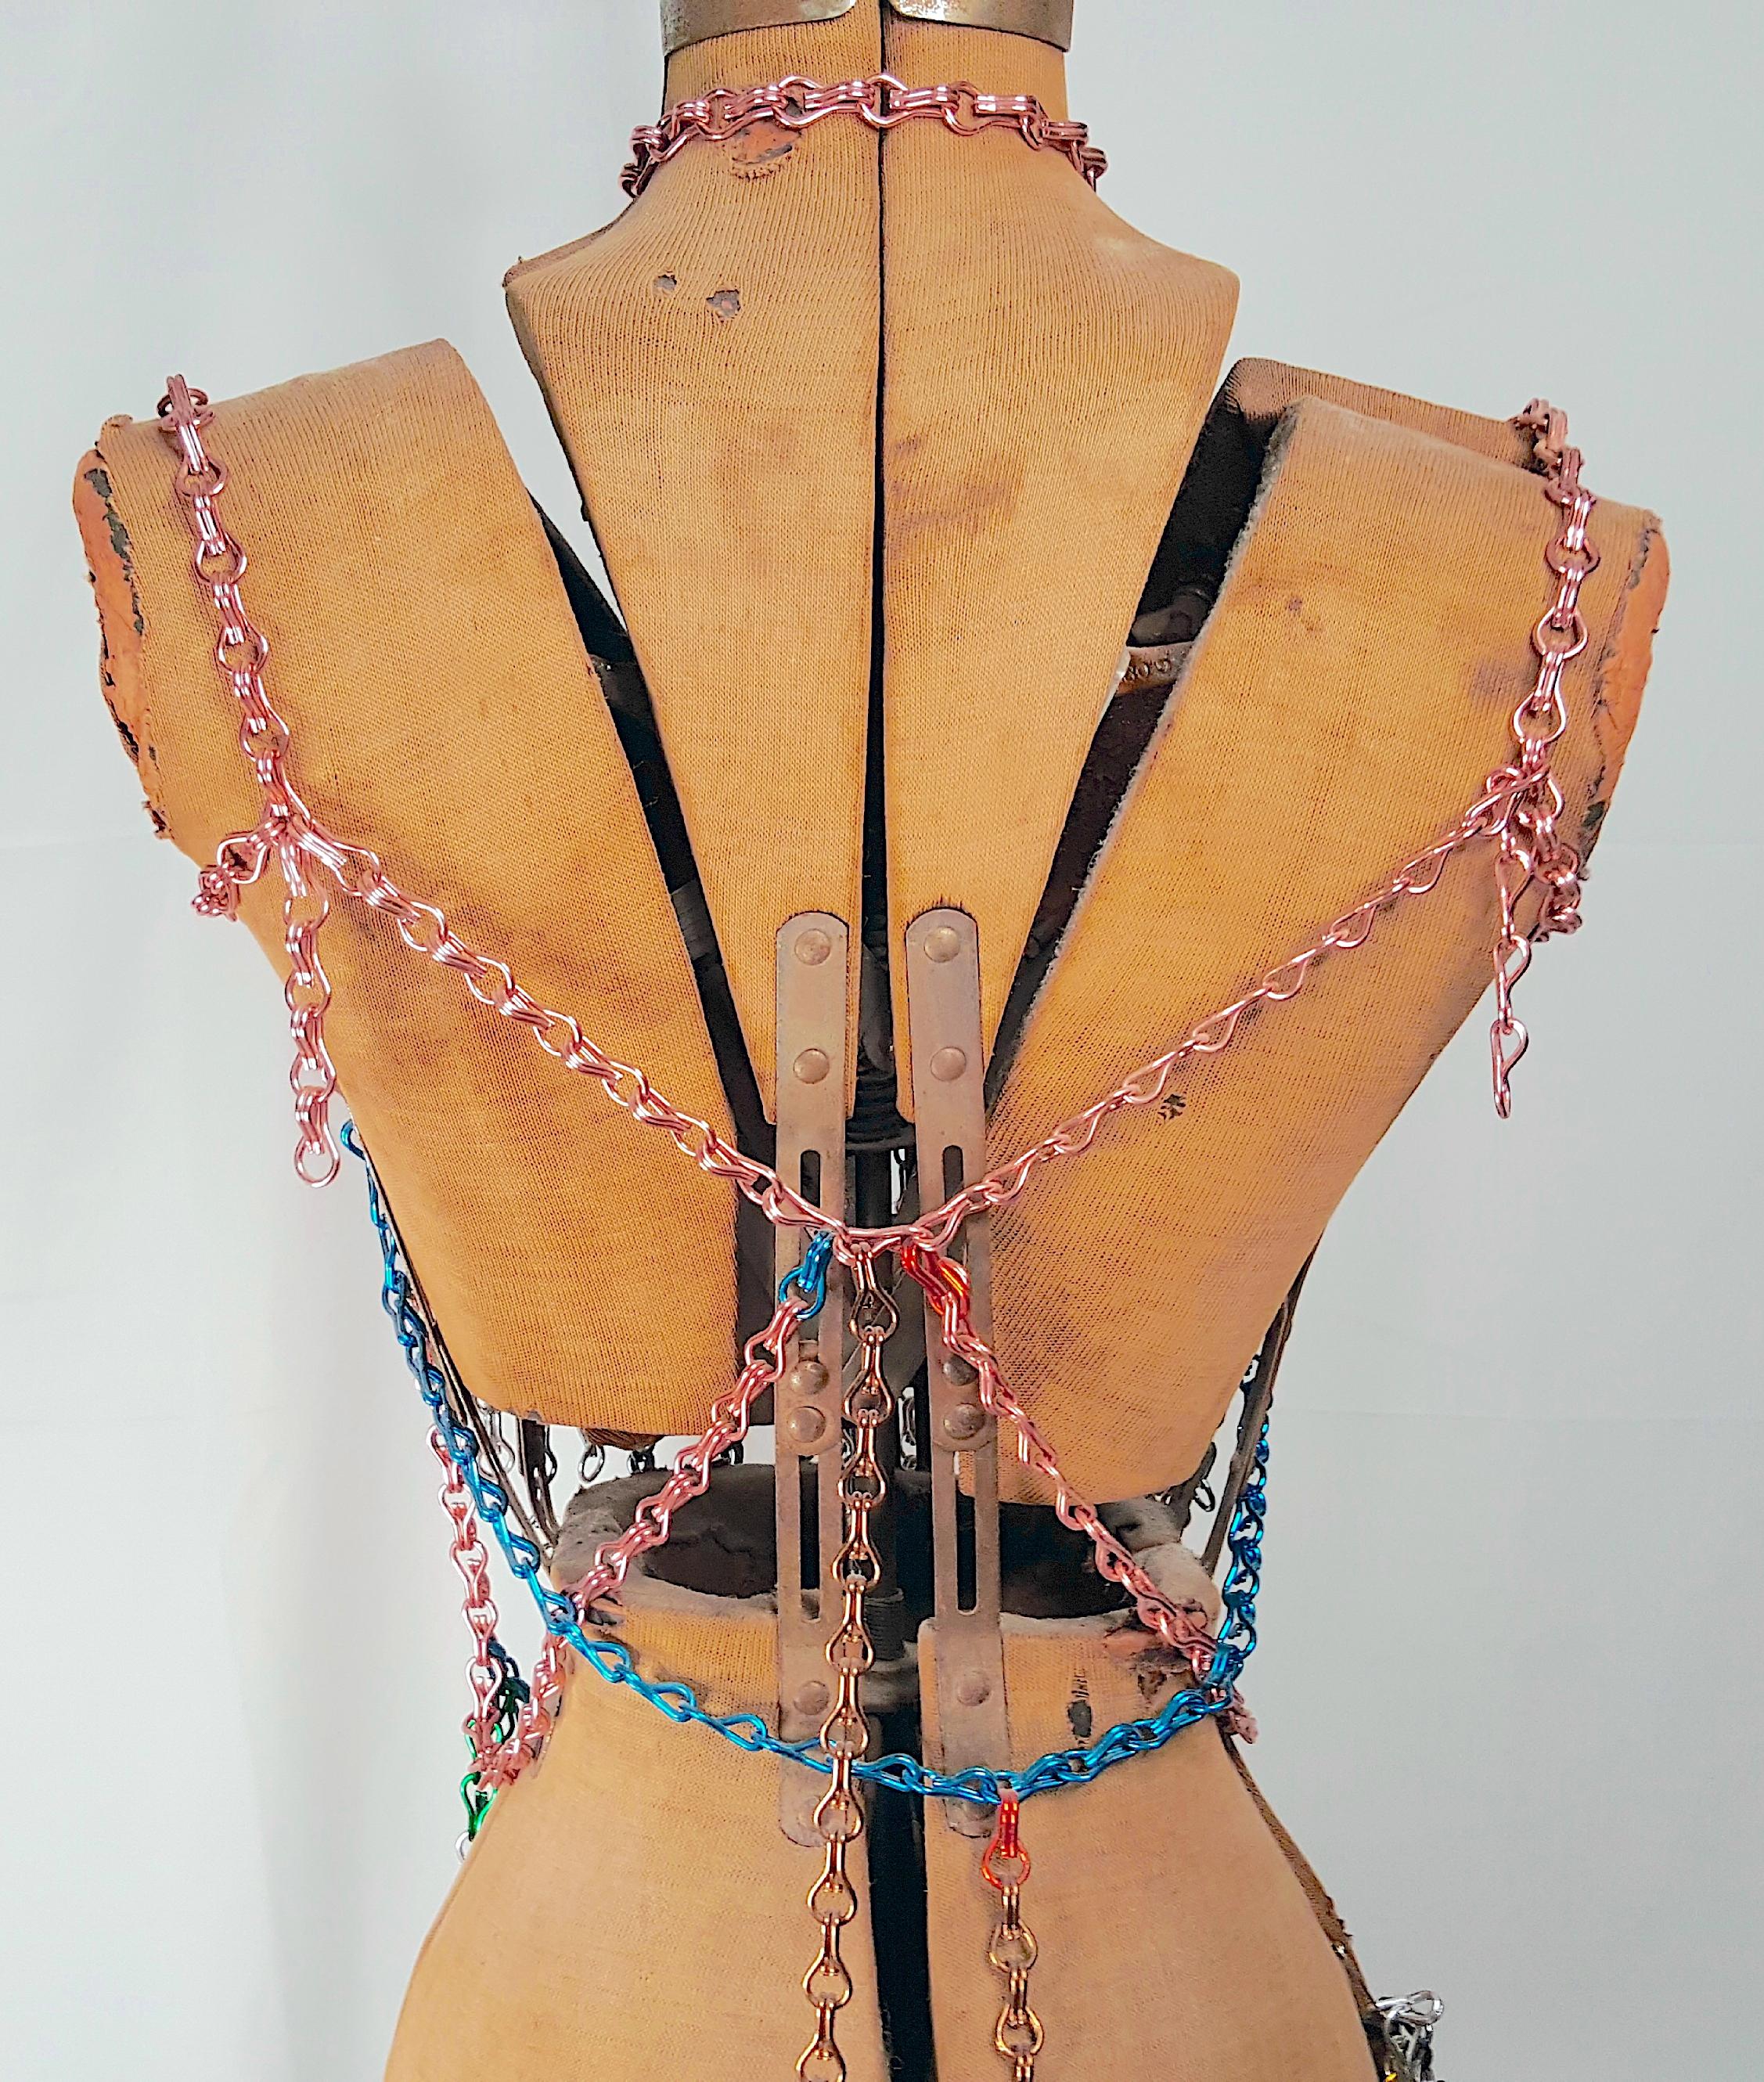 Contemporary YBA YoungBritishArtist Sculpture JewelryCostume First US Exhibit 2000-2001 For Sale